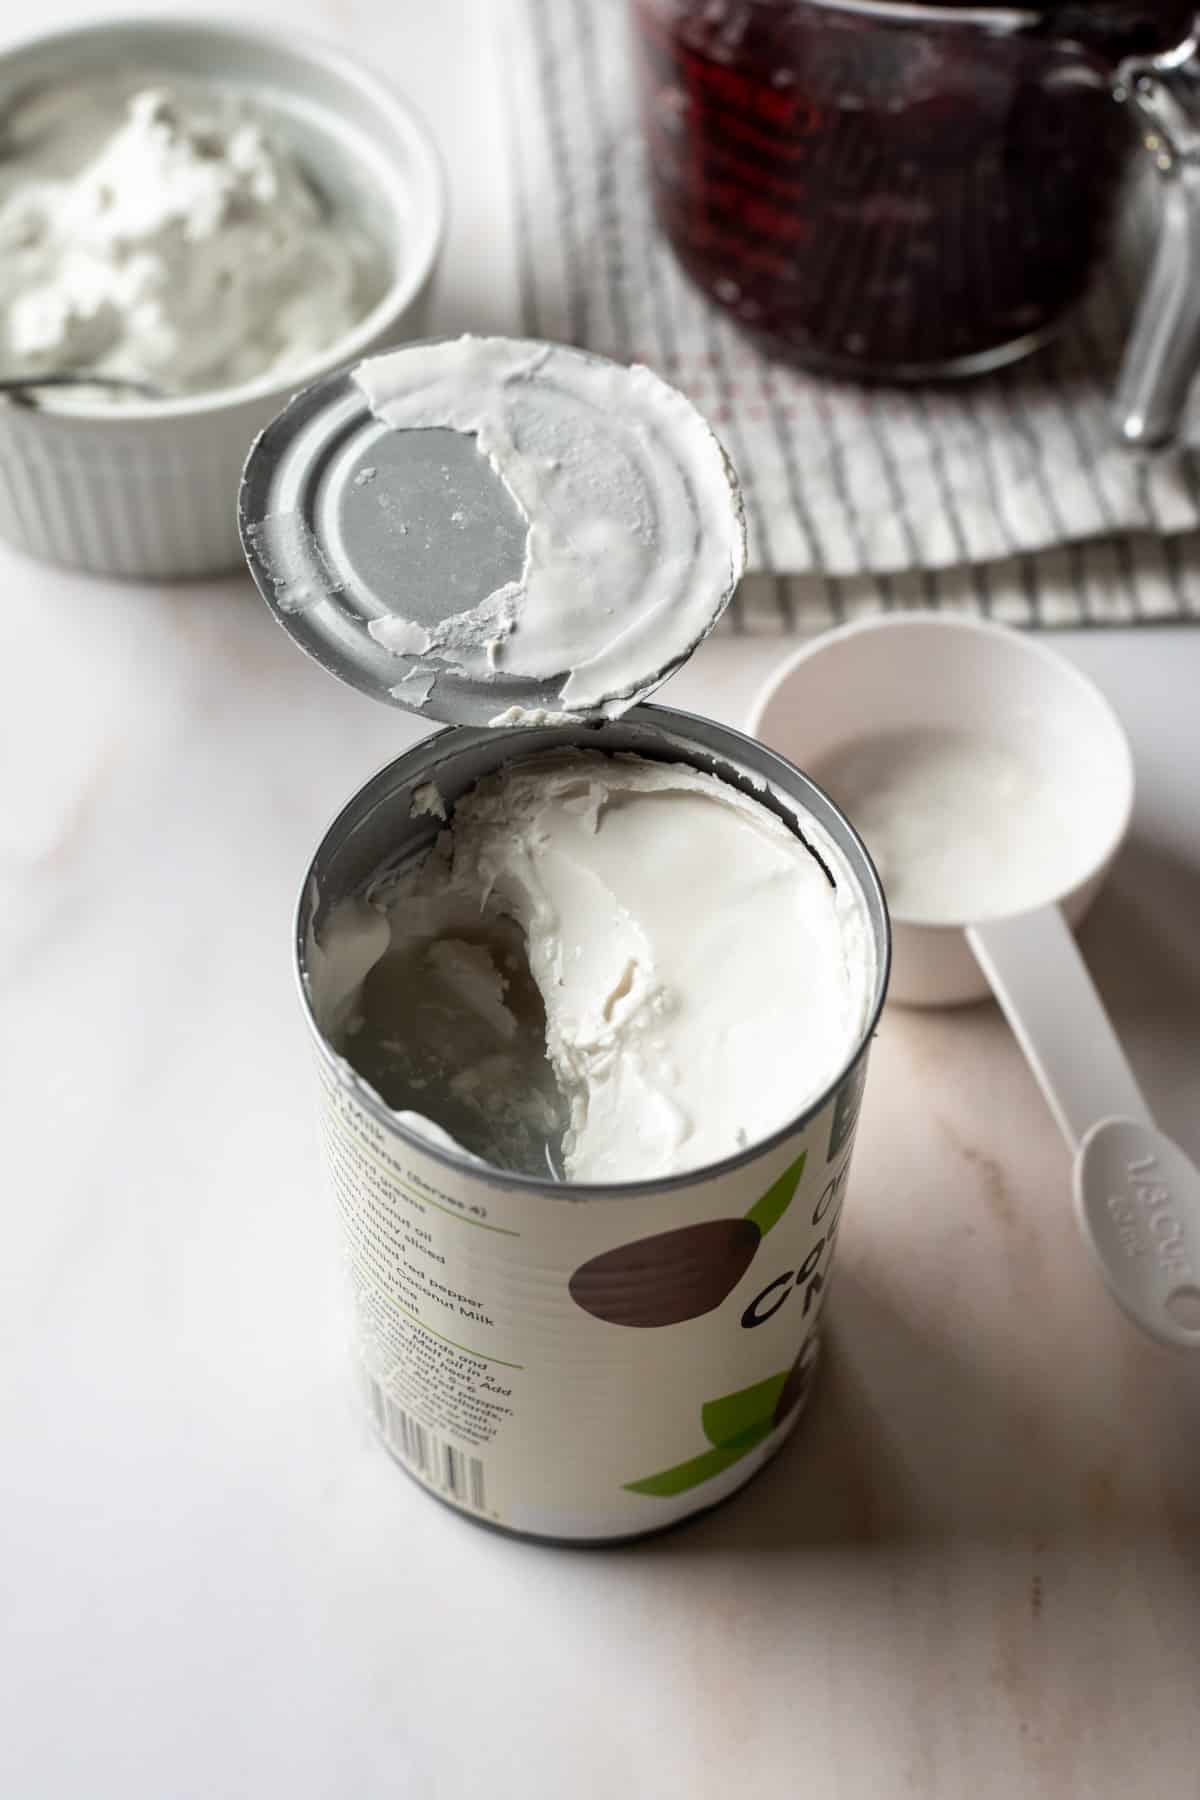 showing the hardened part of coconut cream inside can of coconut milk